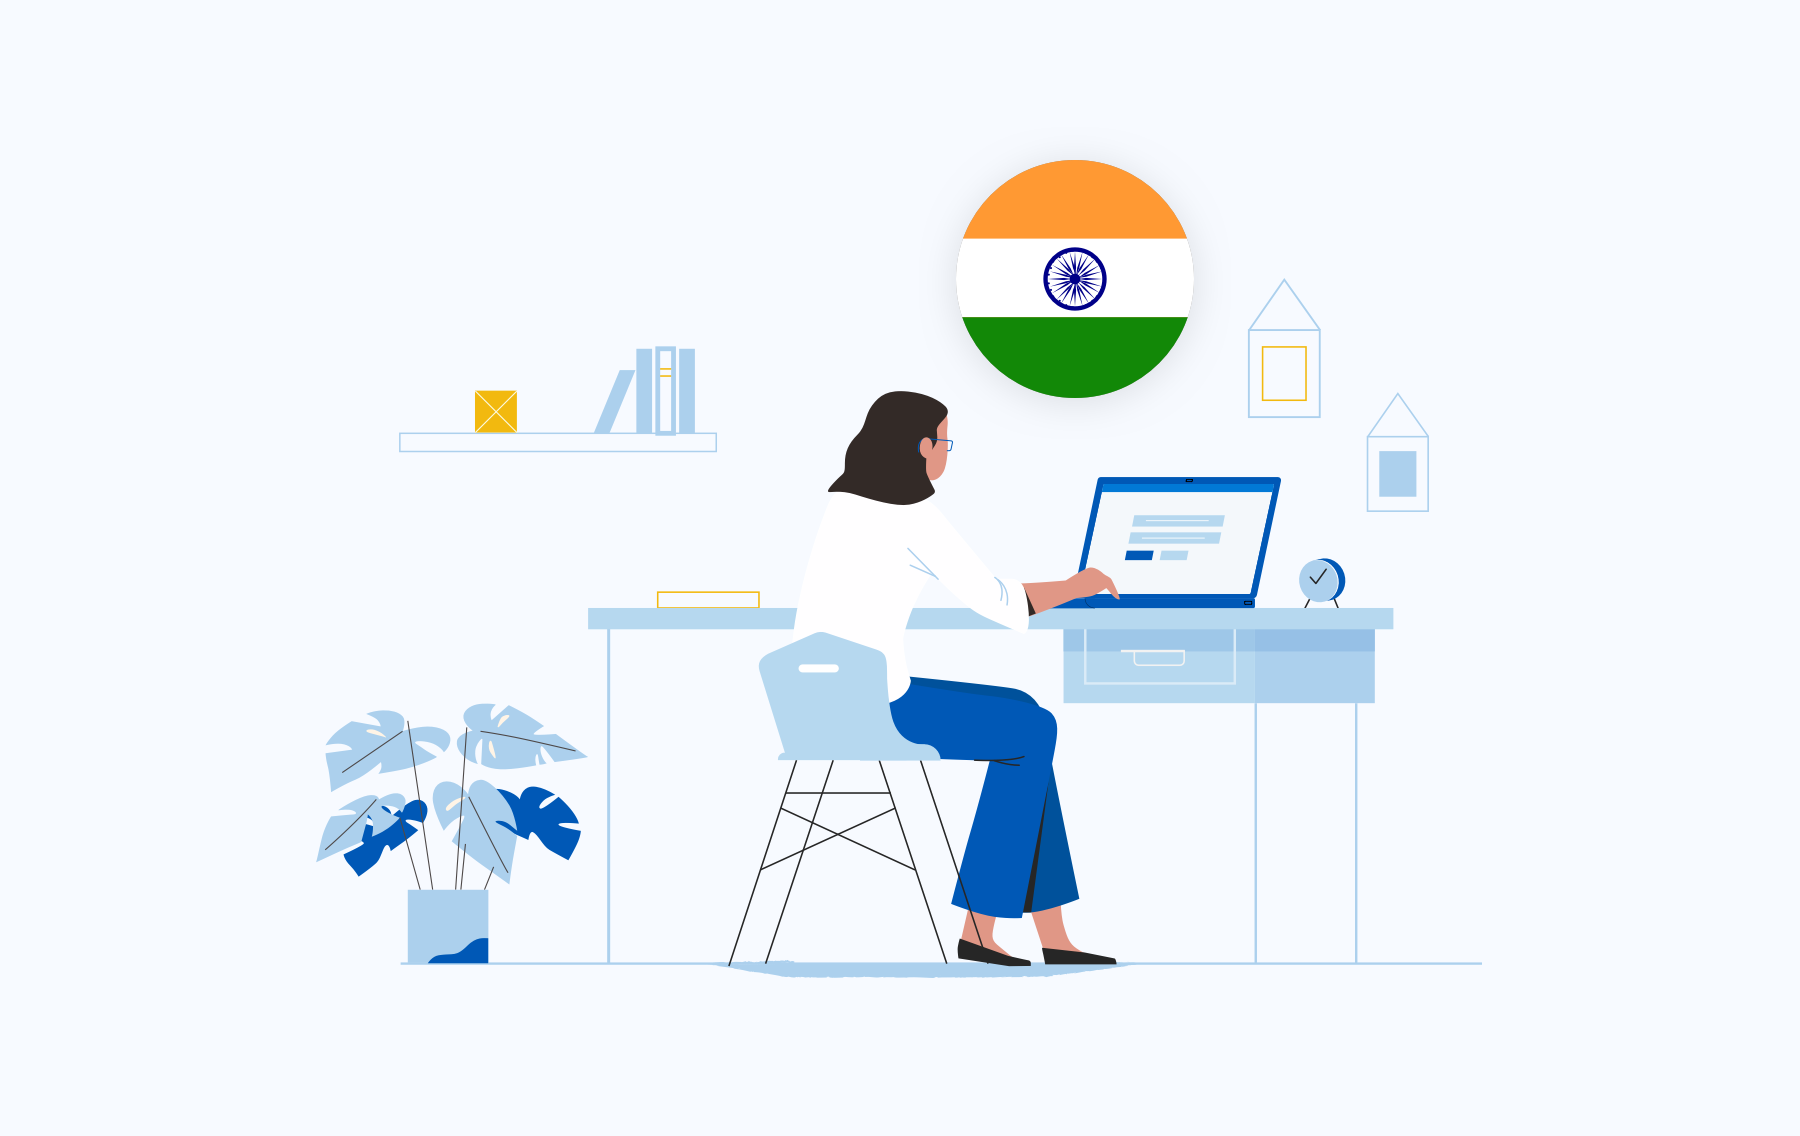 how to become a freelancer in india